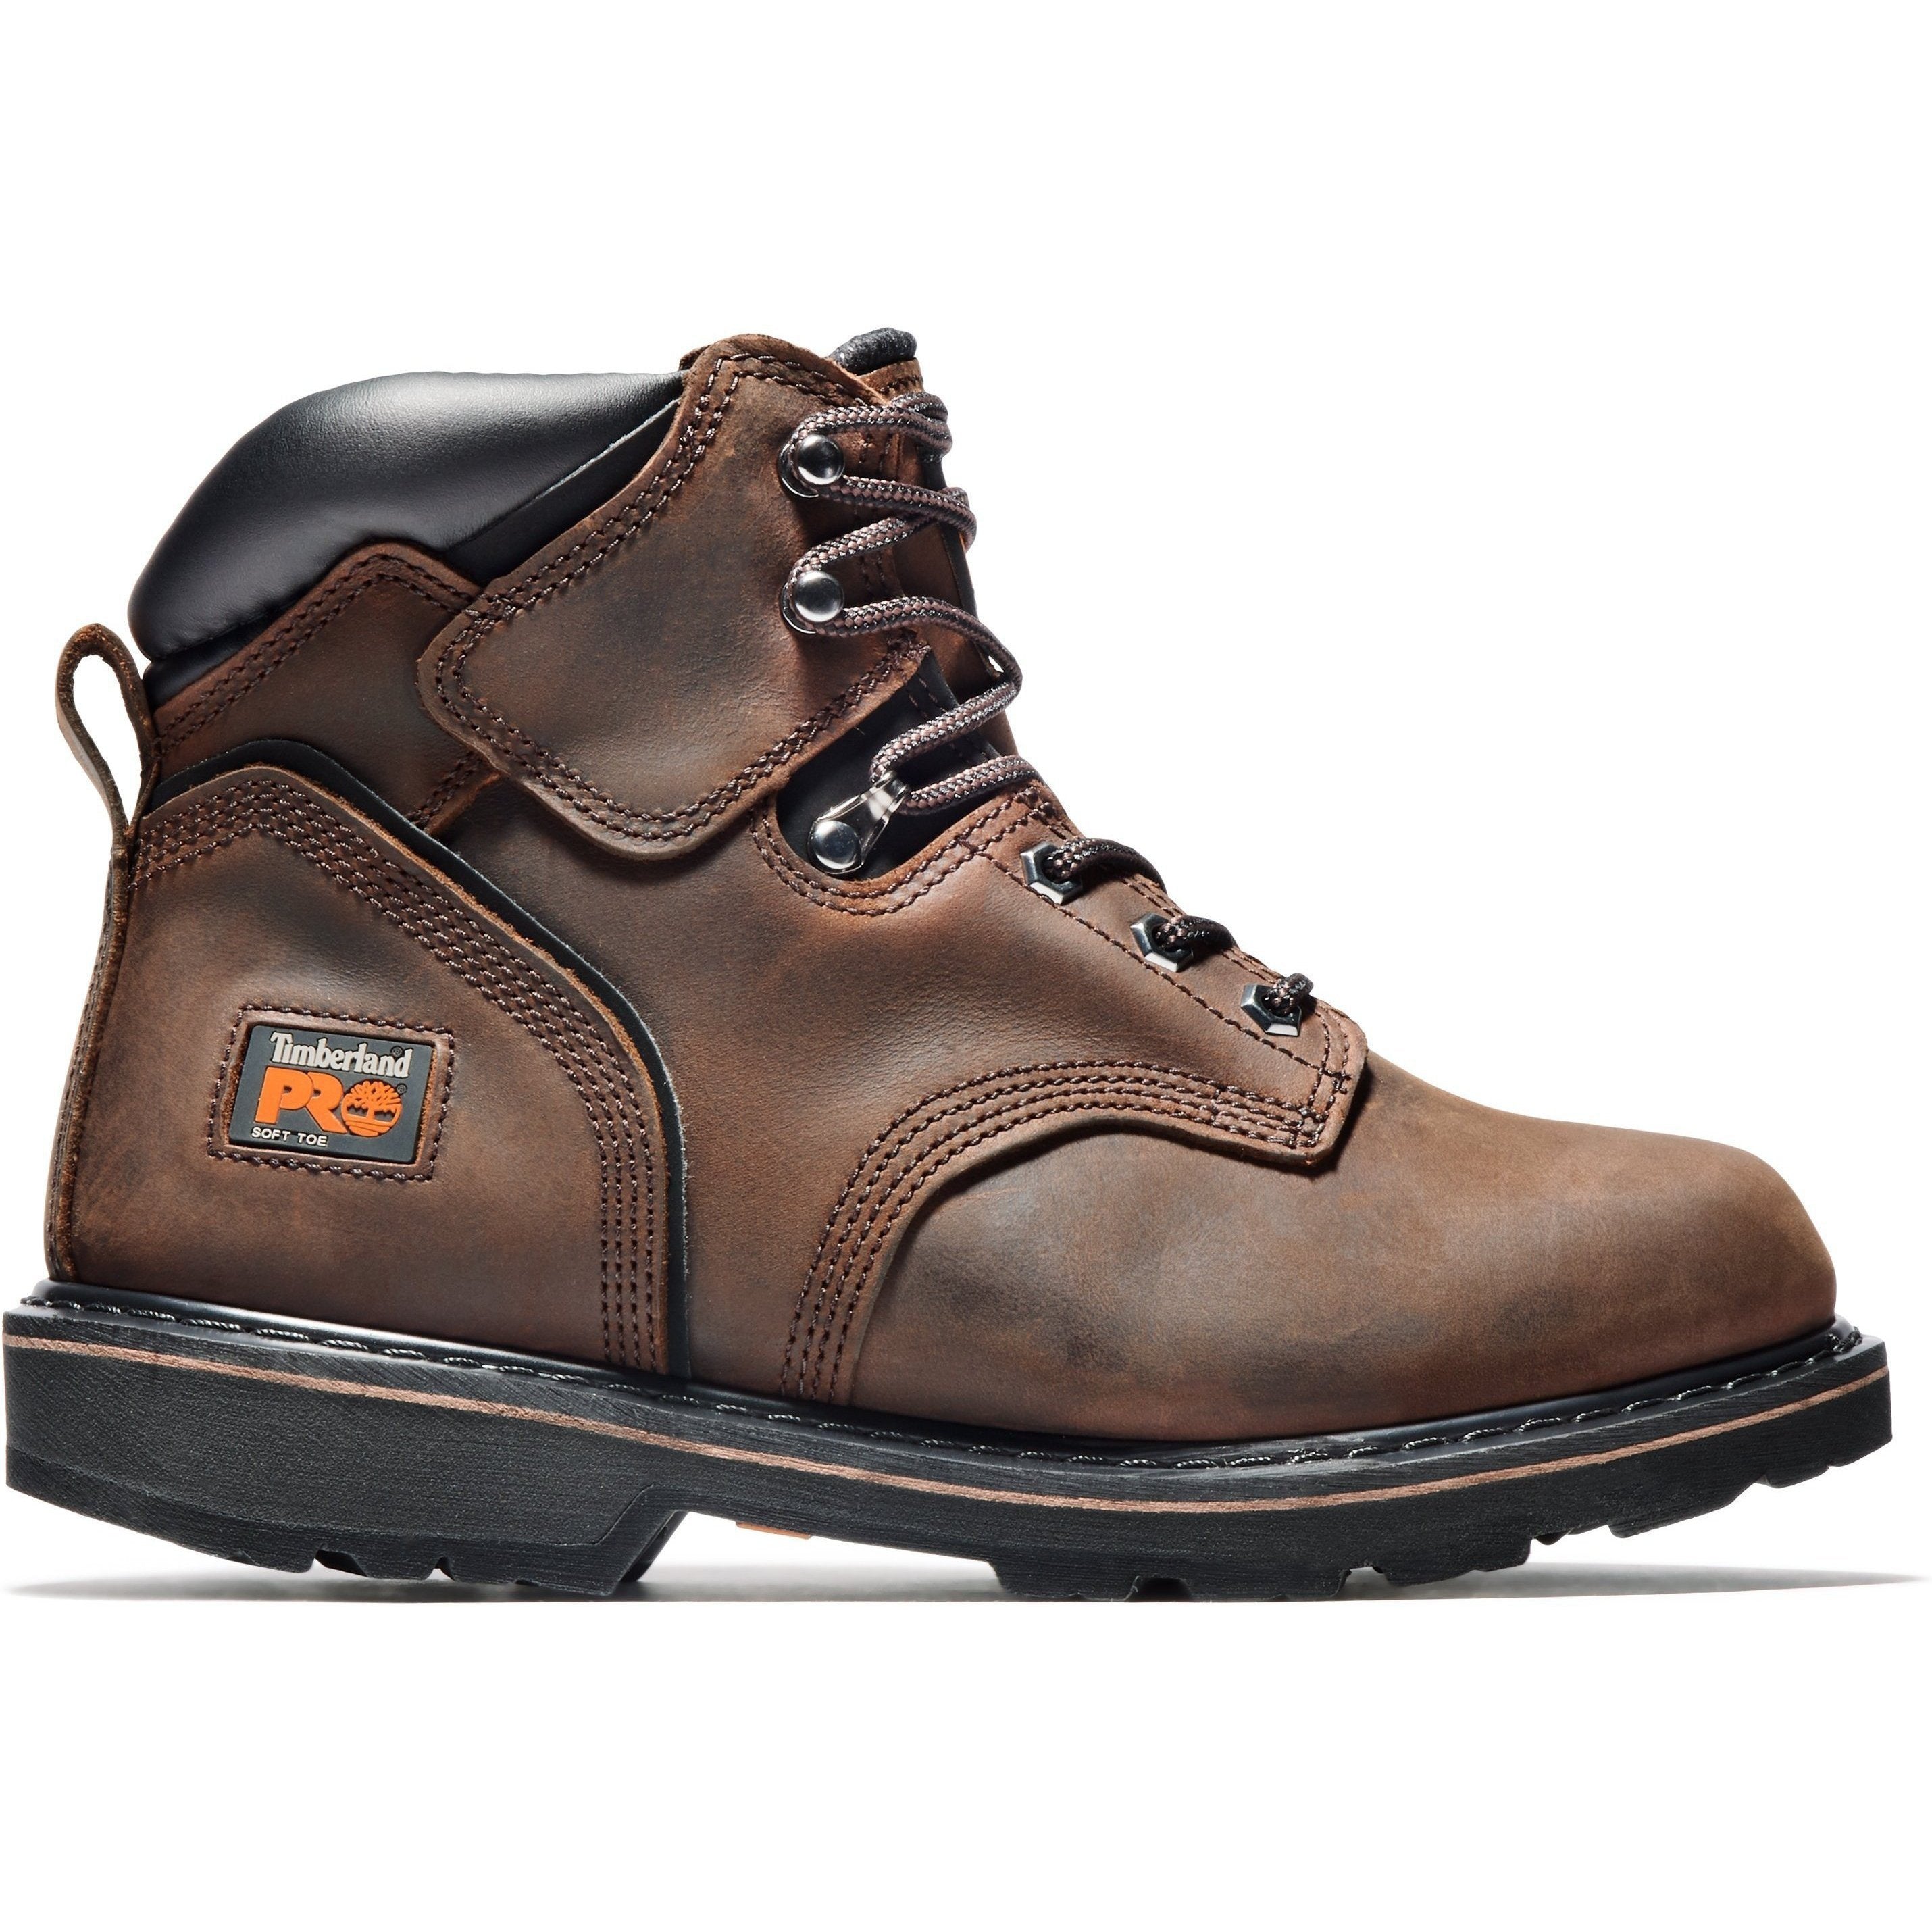 Timberland PRO Men's Pit Boss 6" Soft Toe Work Boots Brown TB133046214  - Overlook Boots